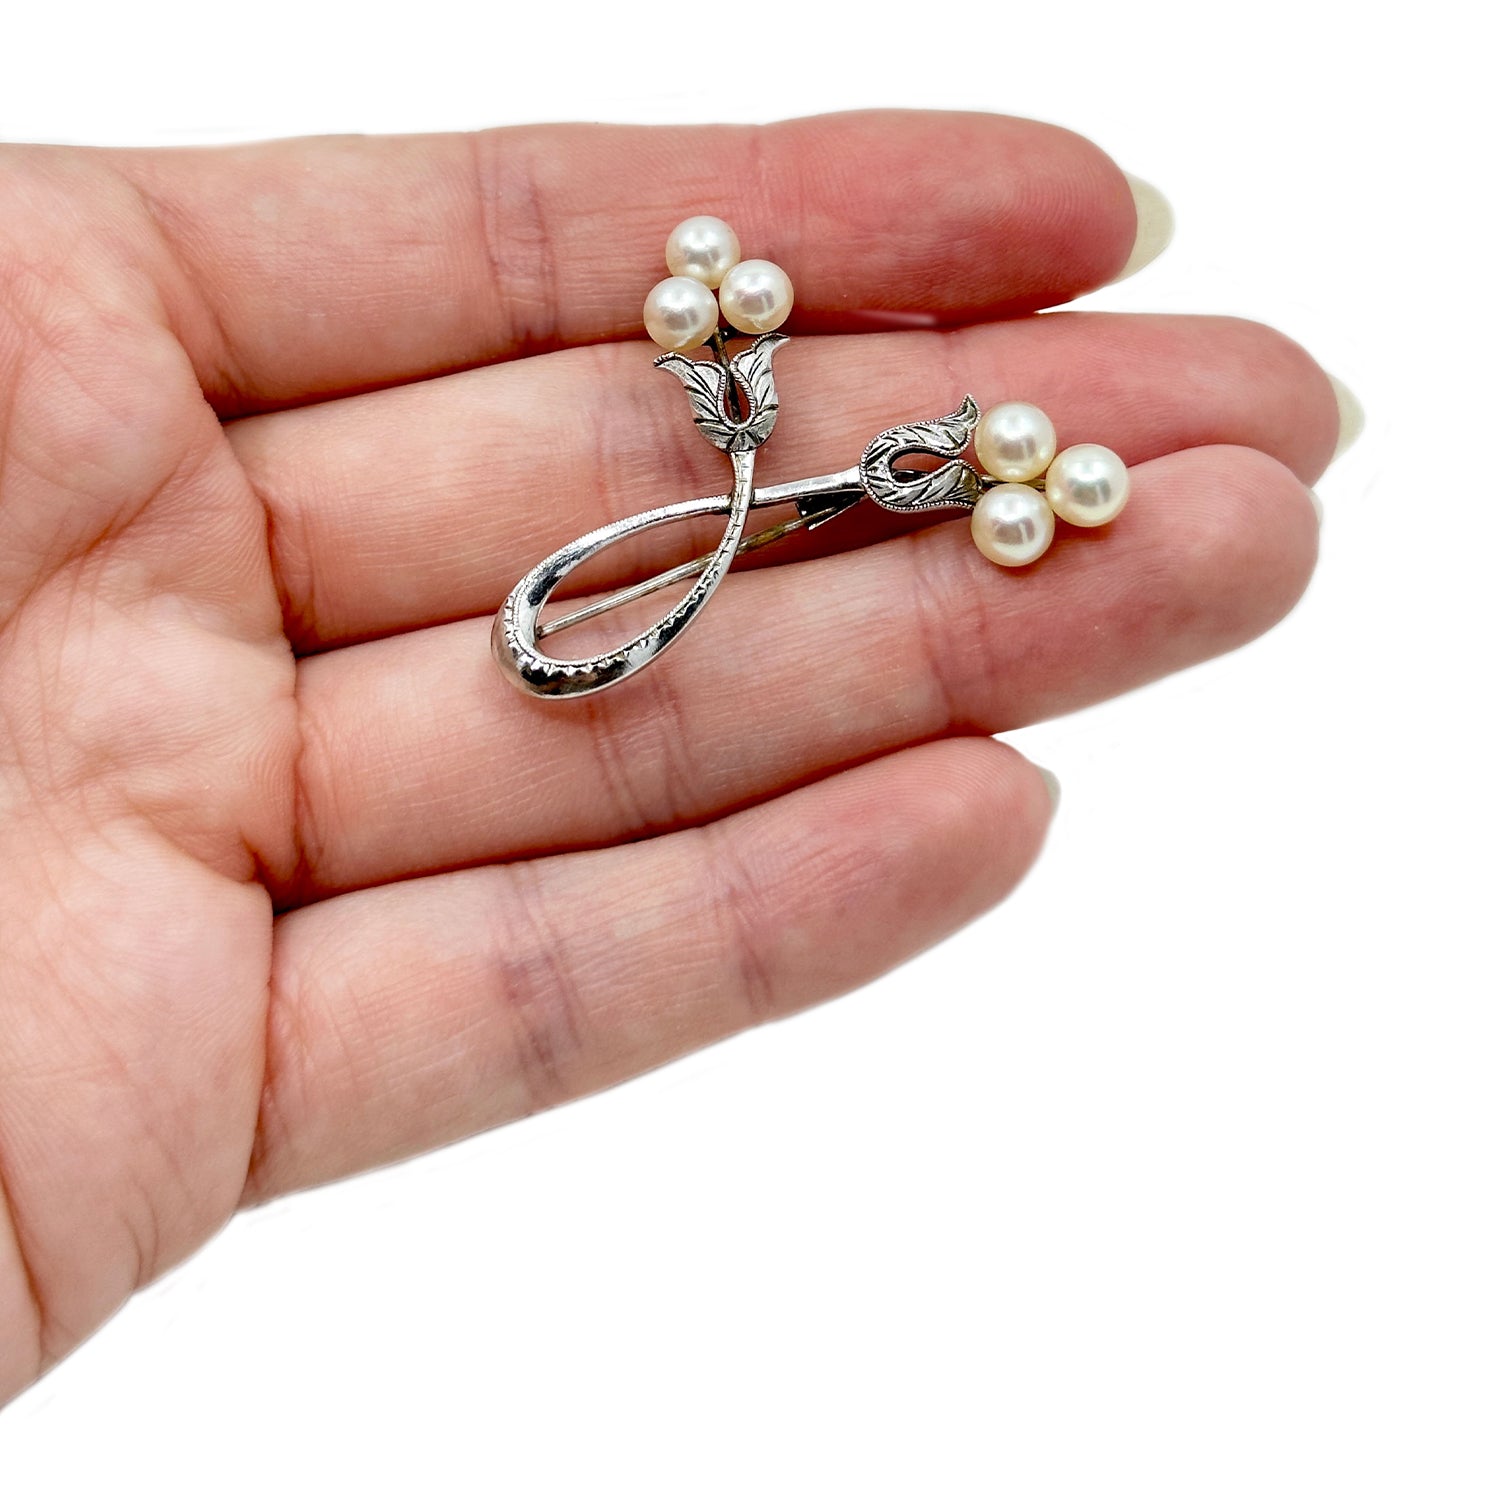 Antique Mikimoto Nouveau Spray Leaf Japanese Cultured Saltwater Akoya Pearl Trombone Brooch- Sterling Silver